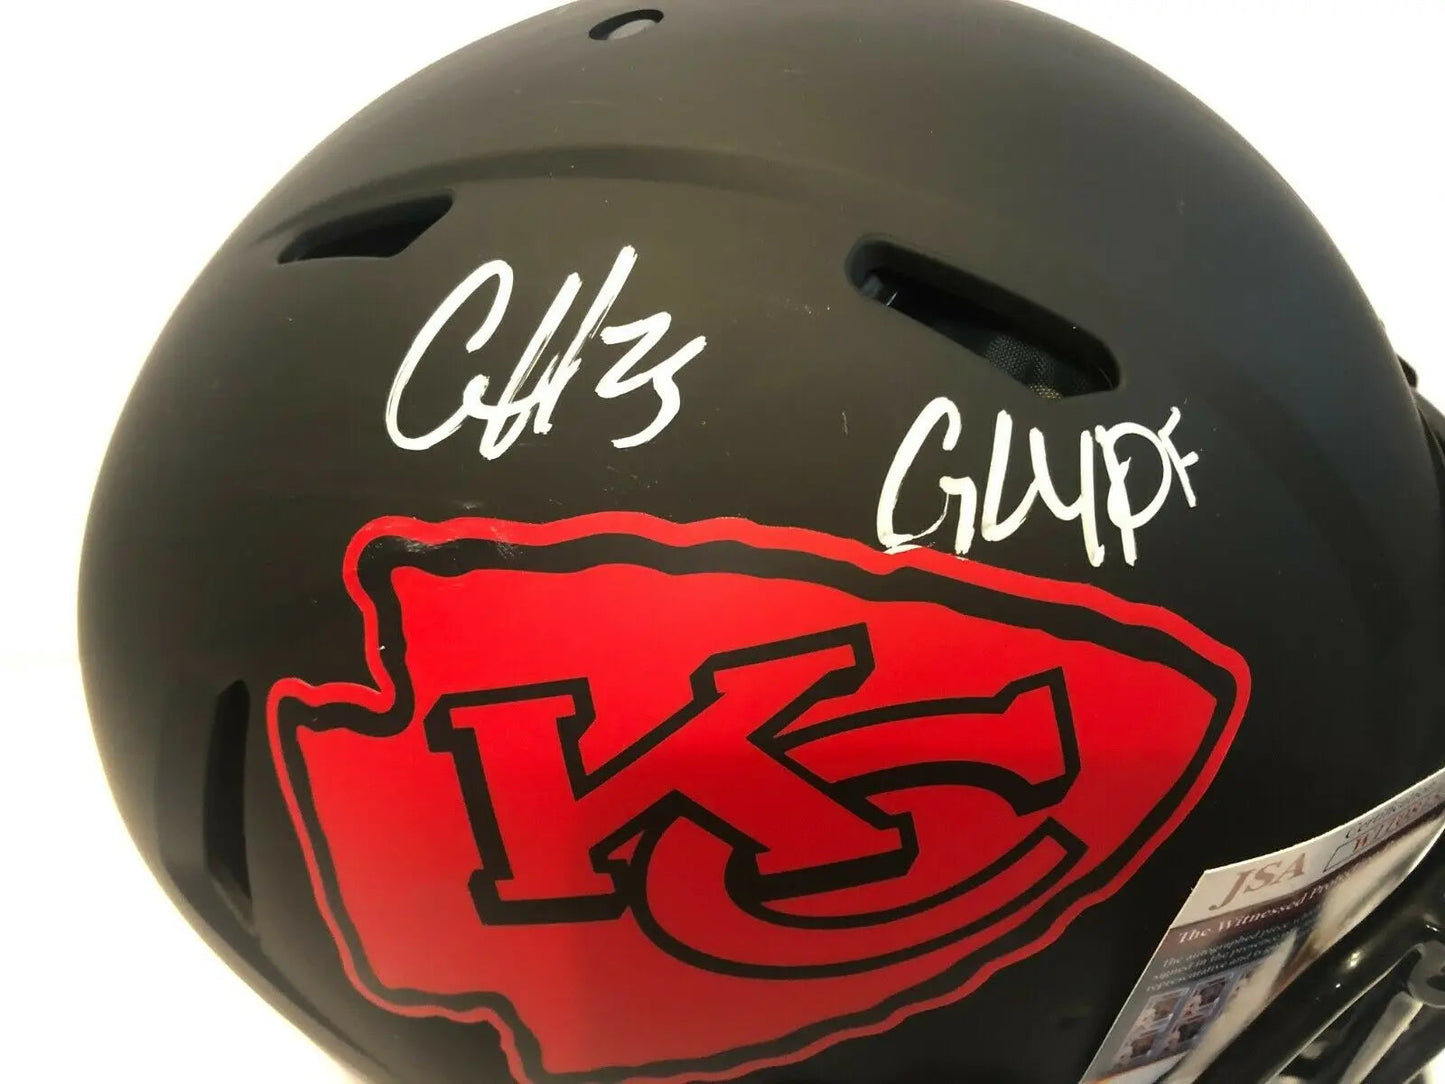 MVP Authentics Clyde Edwards-Helaire Signed K.C. Chiefs Eclipse Authen Full Size Helmet Jsa Coa 584.10 sports jersey framing , jersey framing